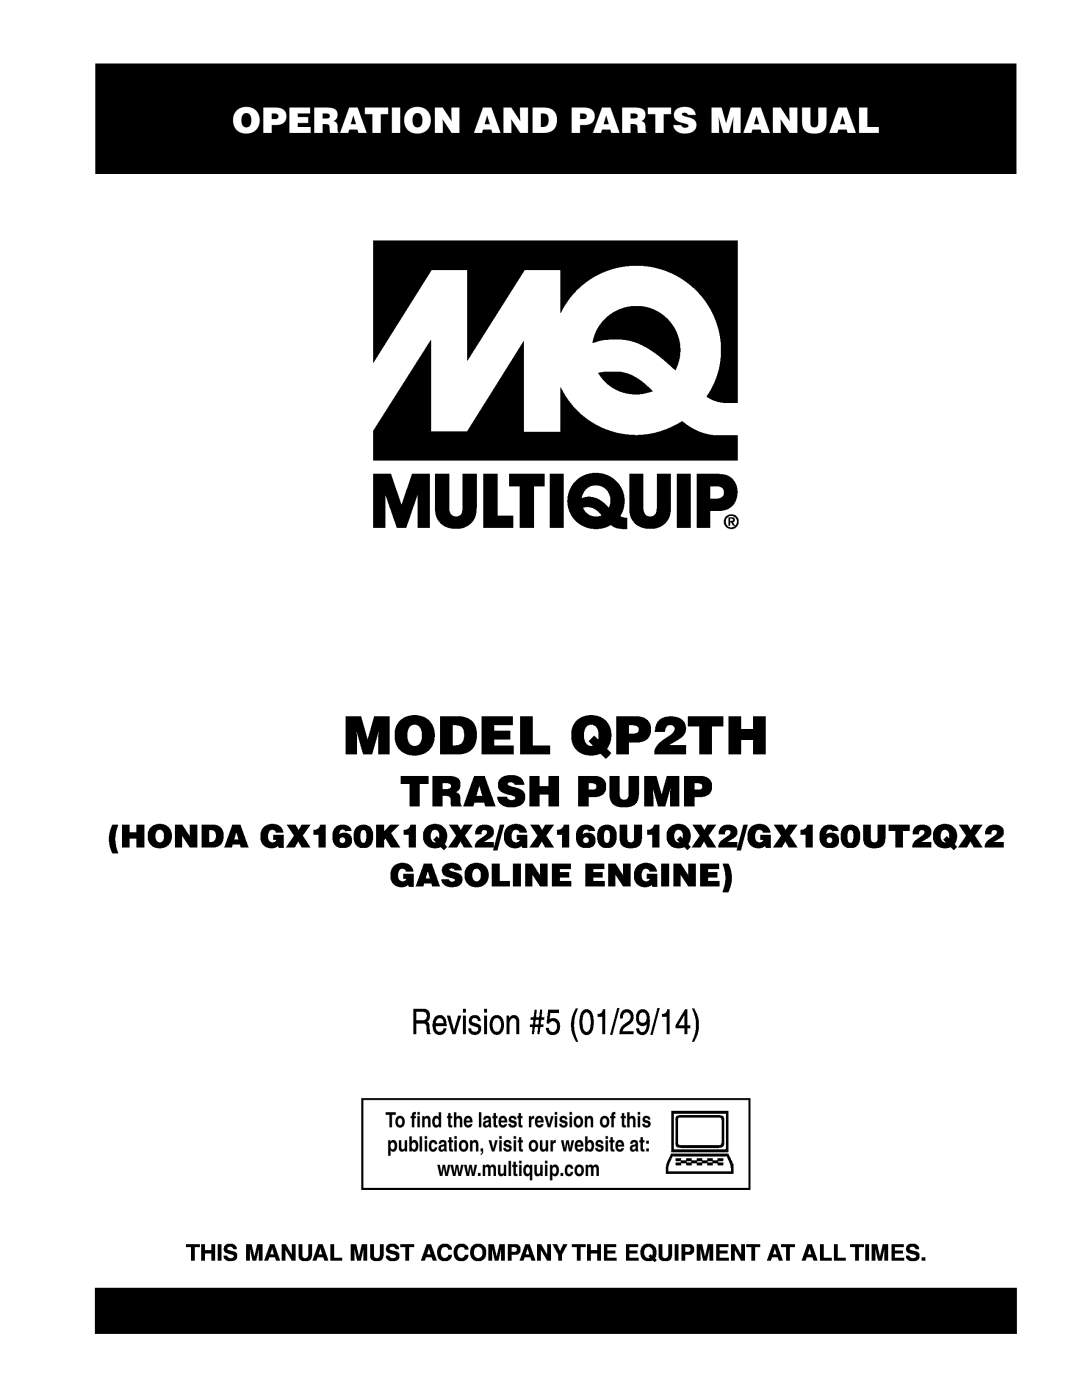 Multiquip manual Operation And Parts Manual, MODEL QP2TH, Trash Pump, Revision #5 01/29/14, Gasoline Engine 